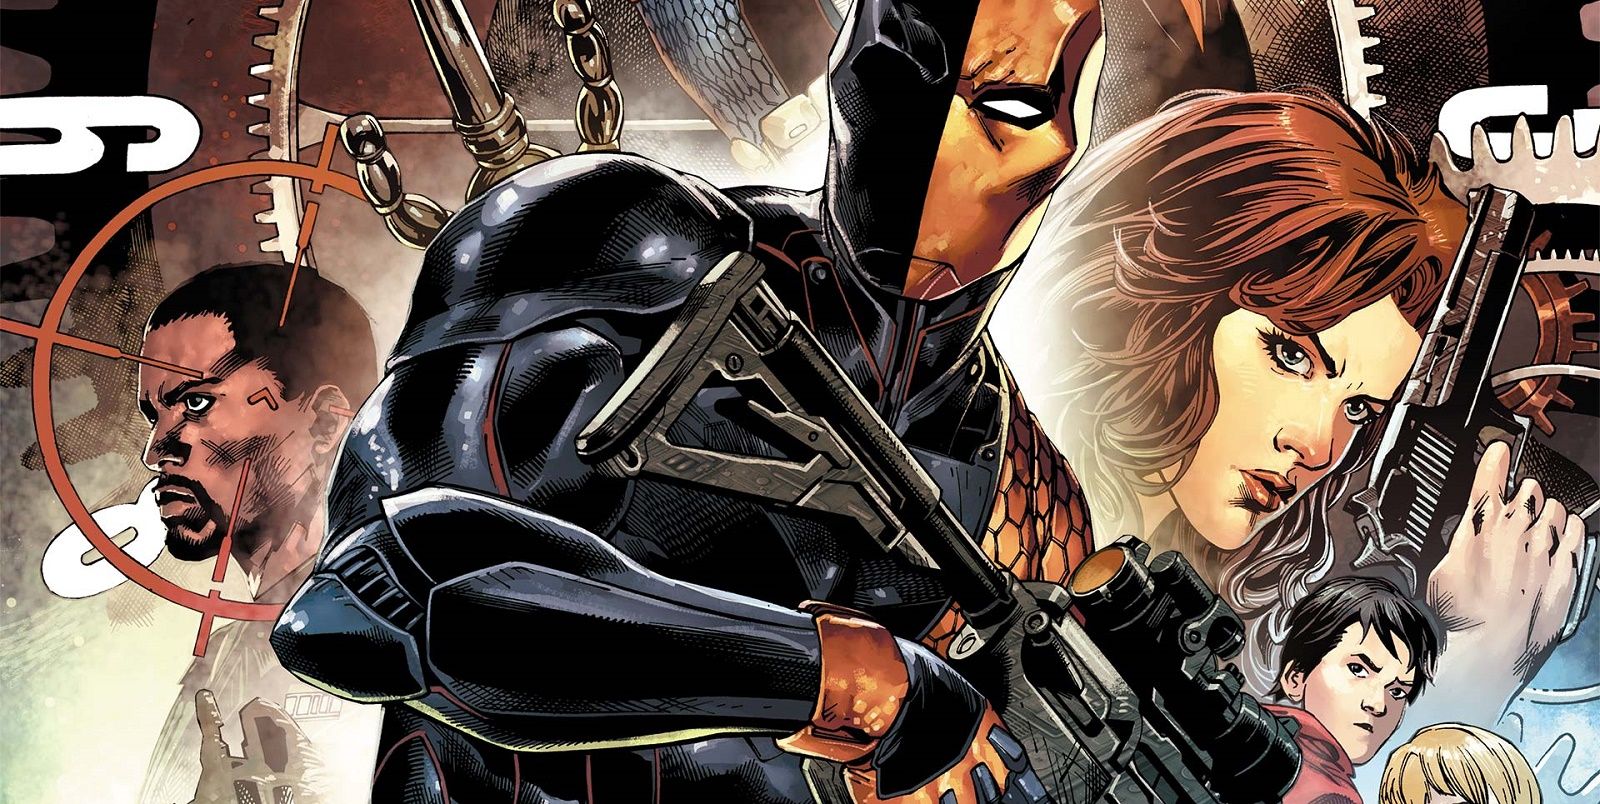 What Role Could Deathstroke Play in Justice League?